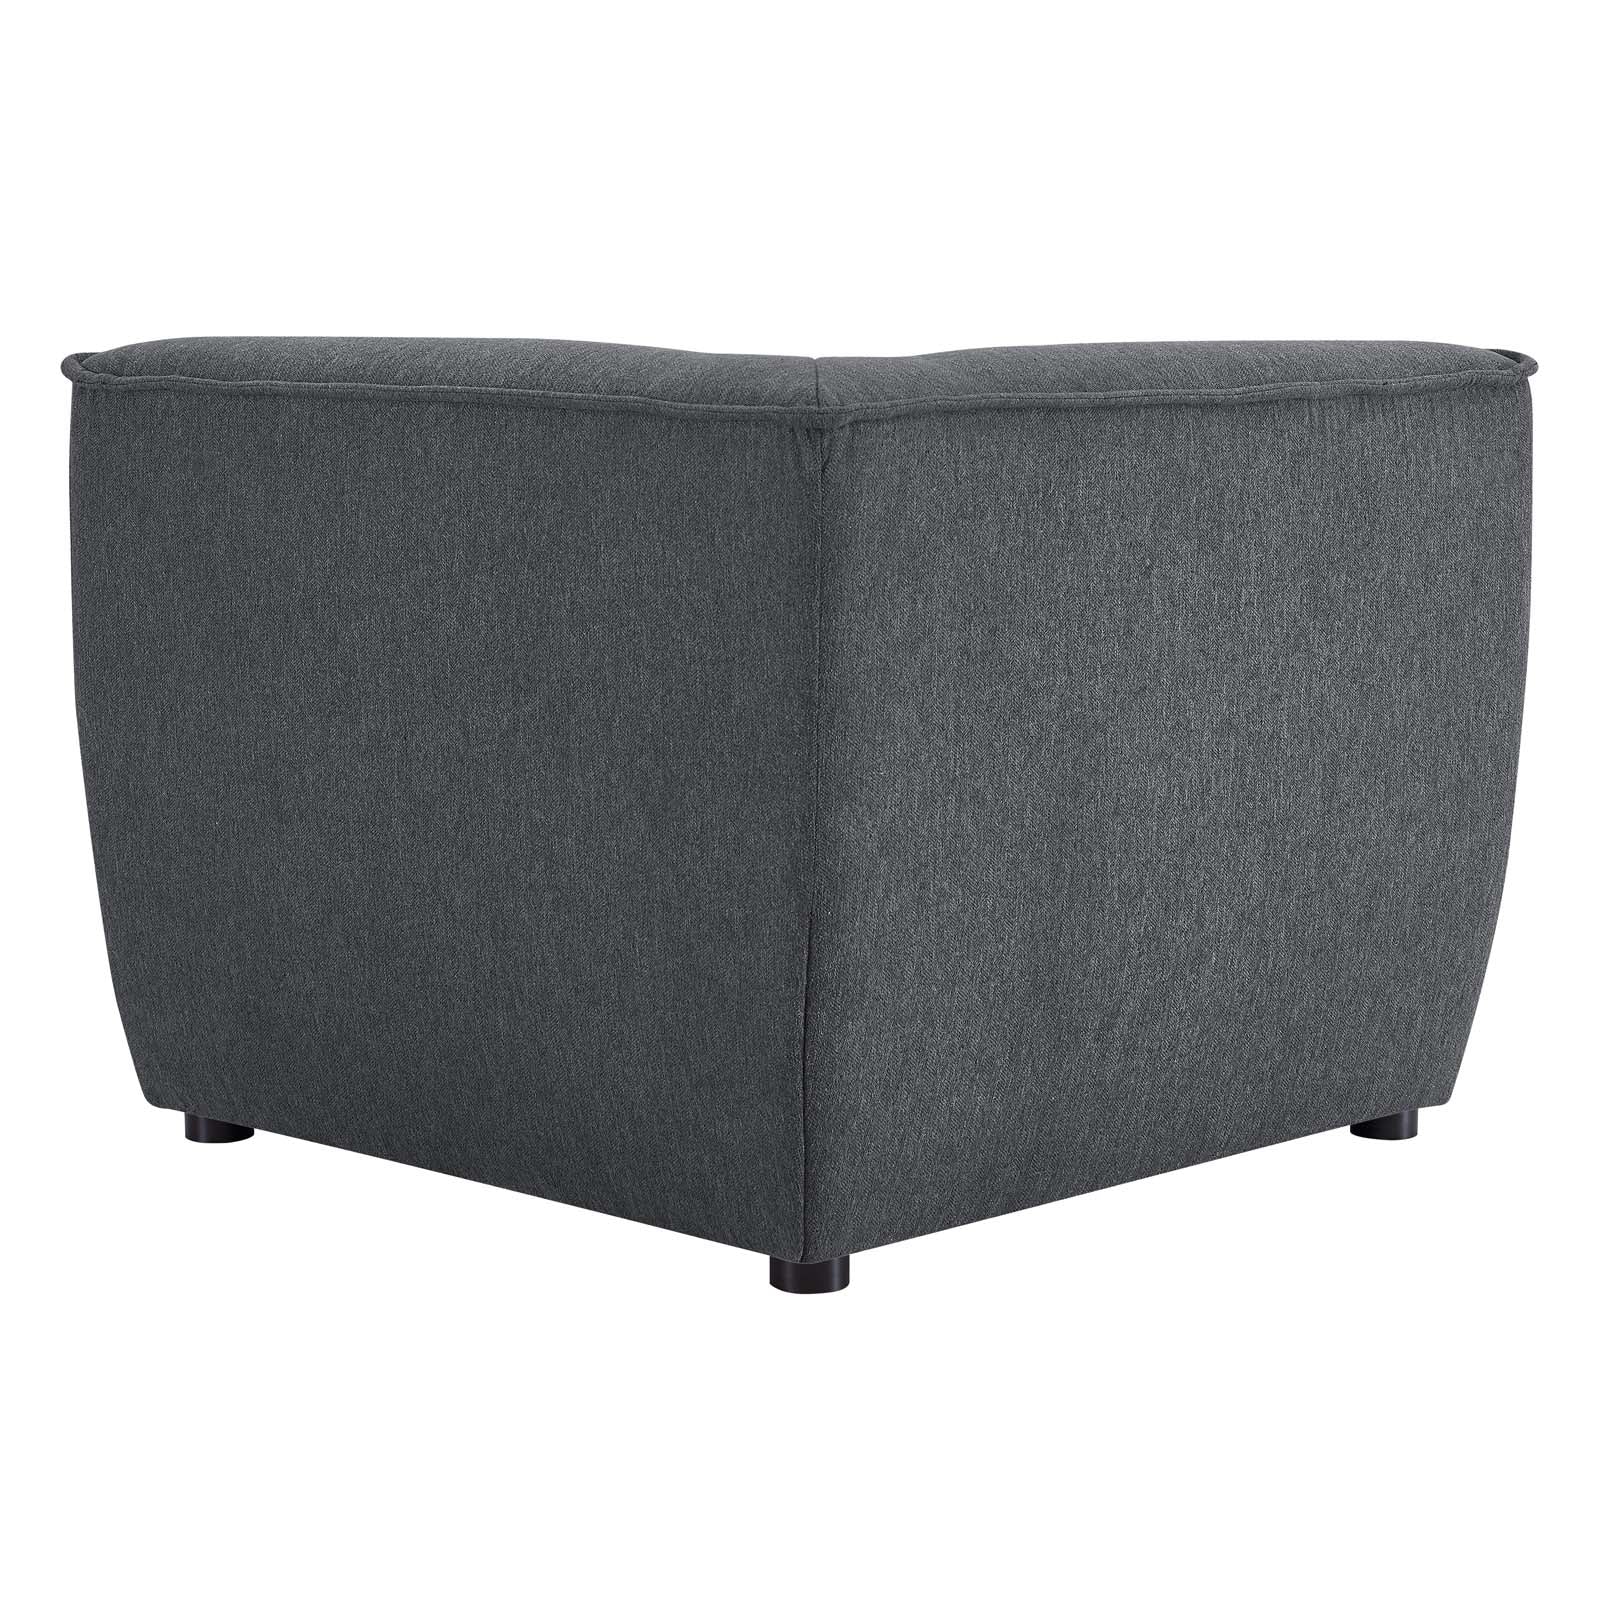 Comprise Corner Sectional Sofa Chair - East Shore Modern Home Furnishings